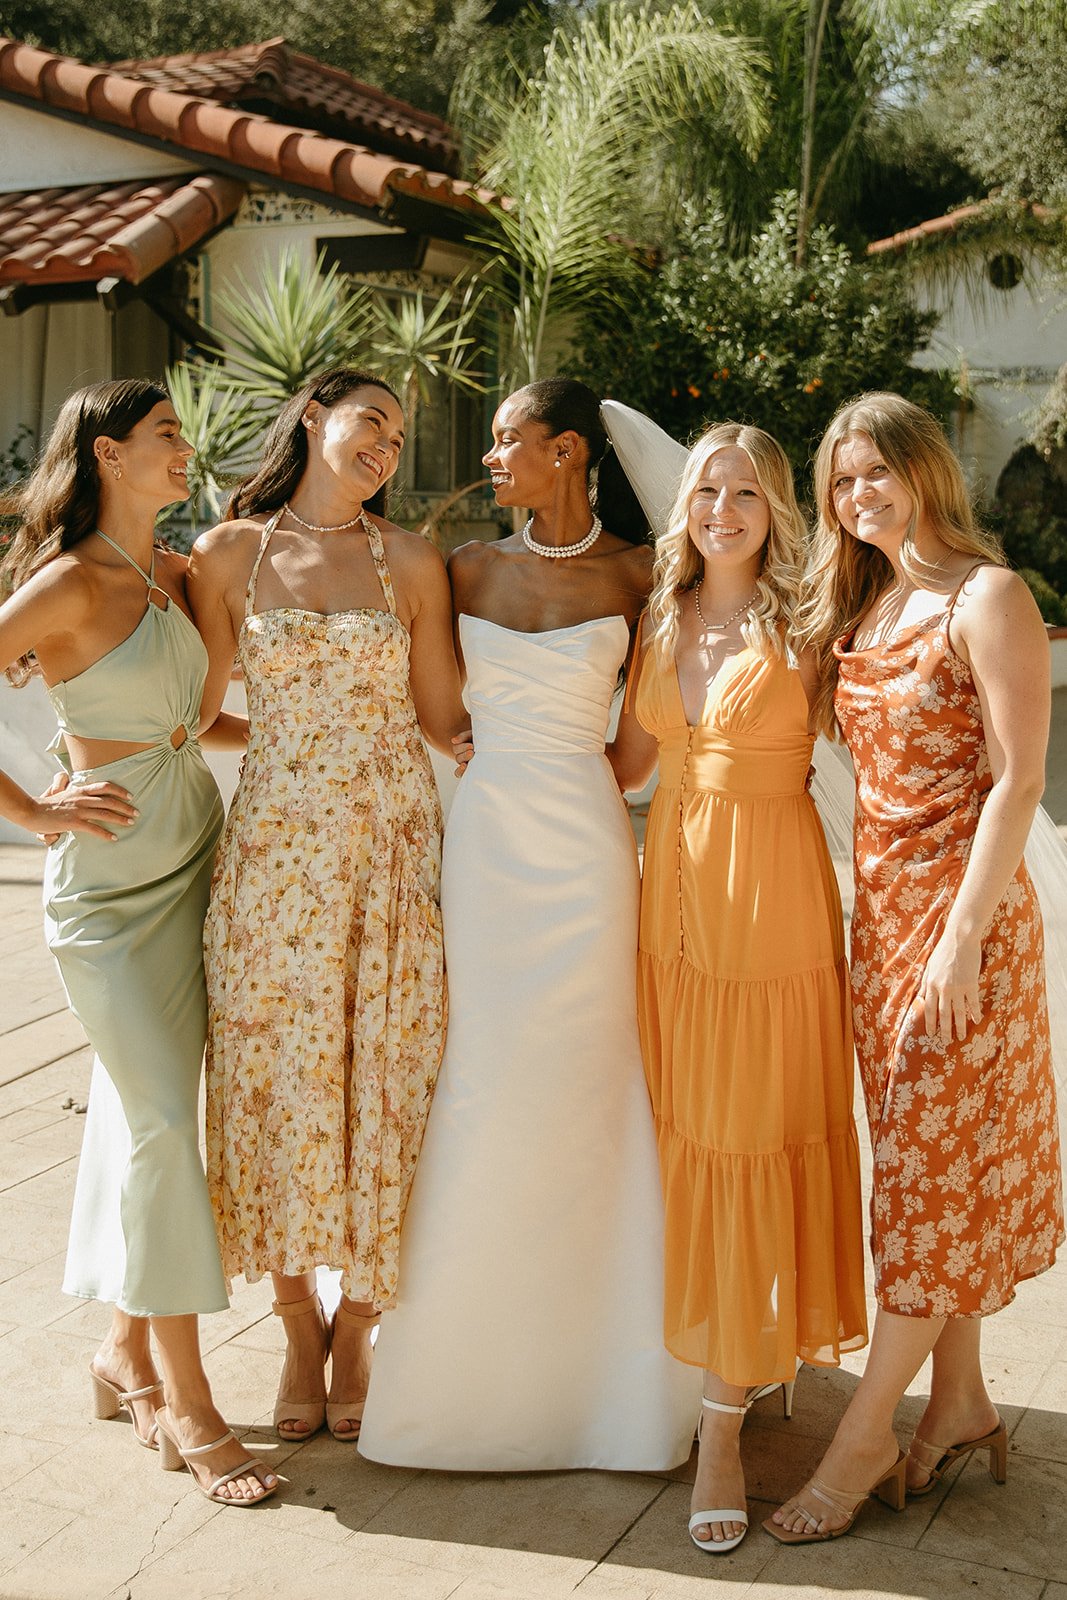 Bride and bridesmaid smiling and posing in colorful dresses